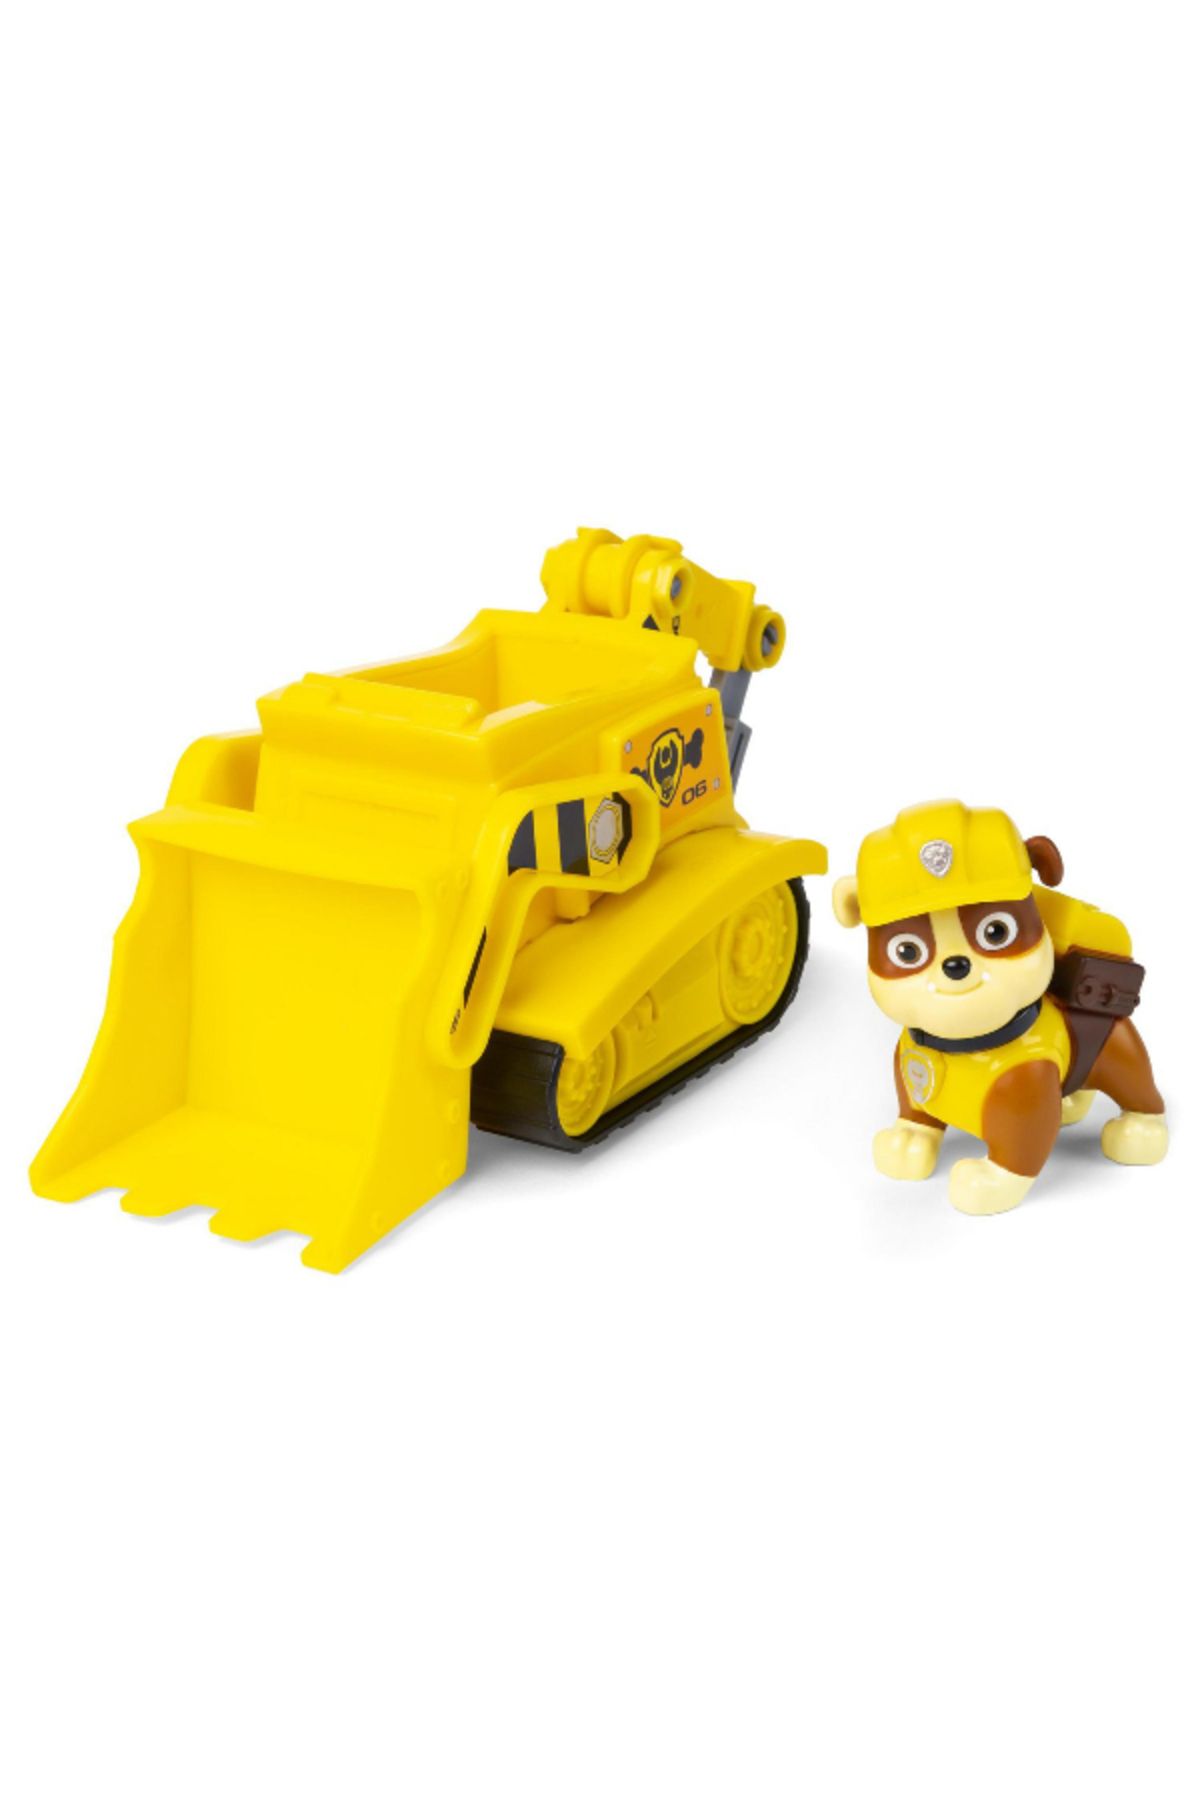 TOYFEST Paw Patrol Mission Vehicle and Hero Set - Rubble - 15 Cm